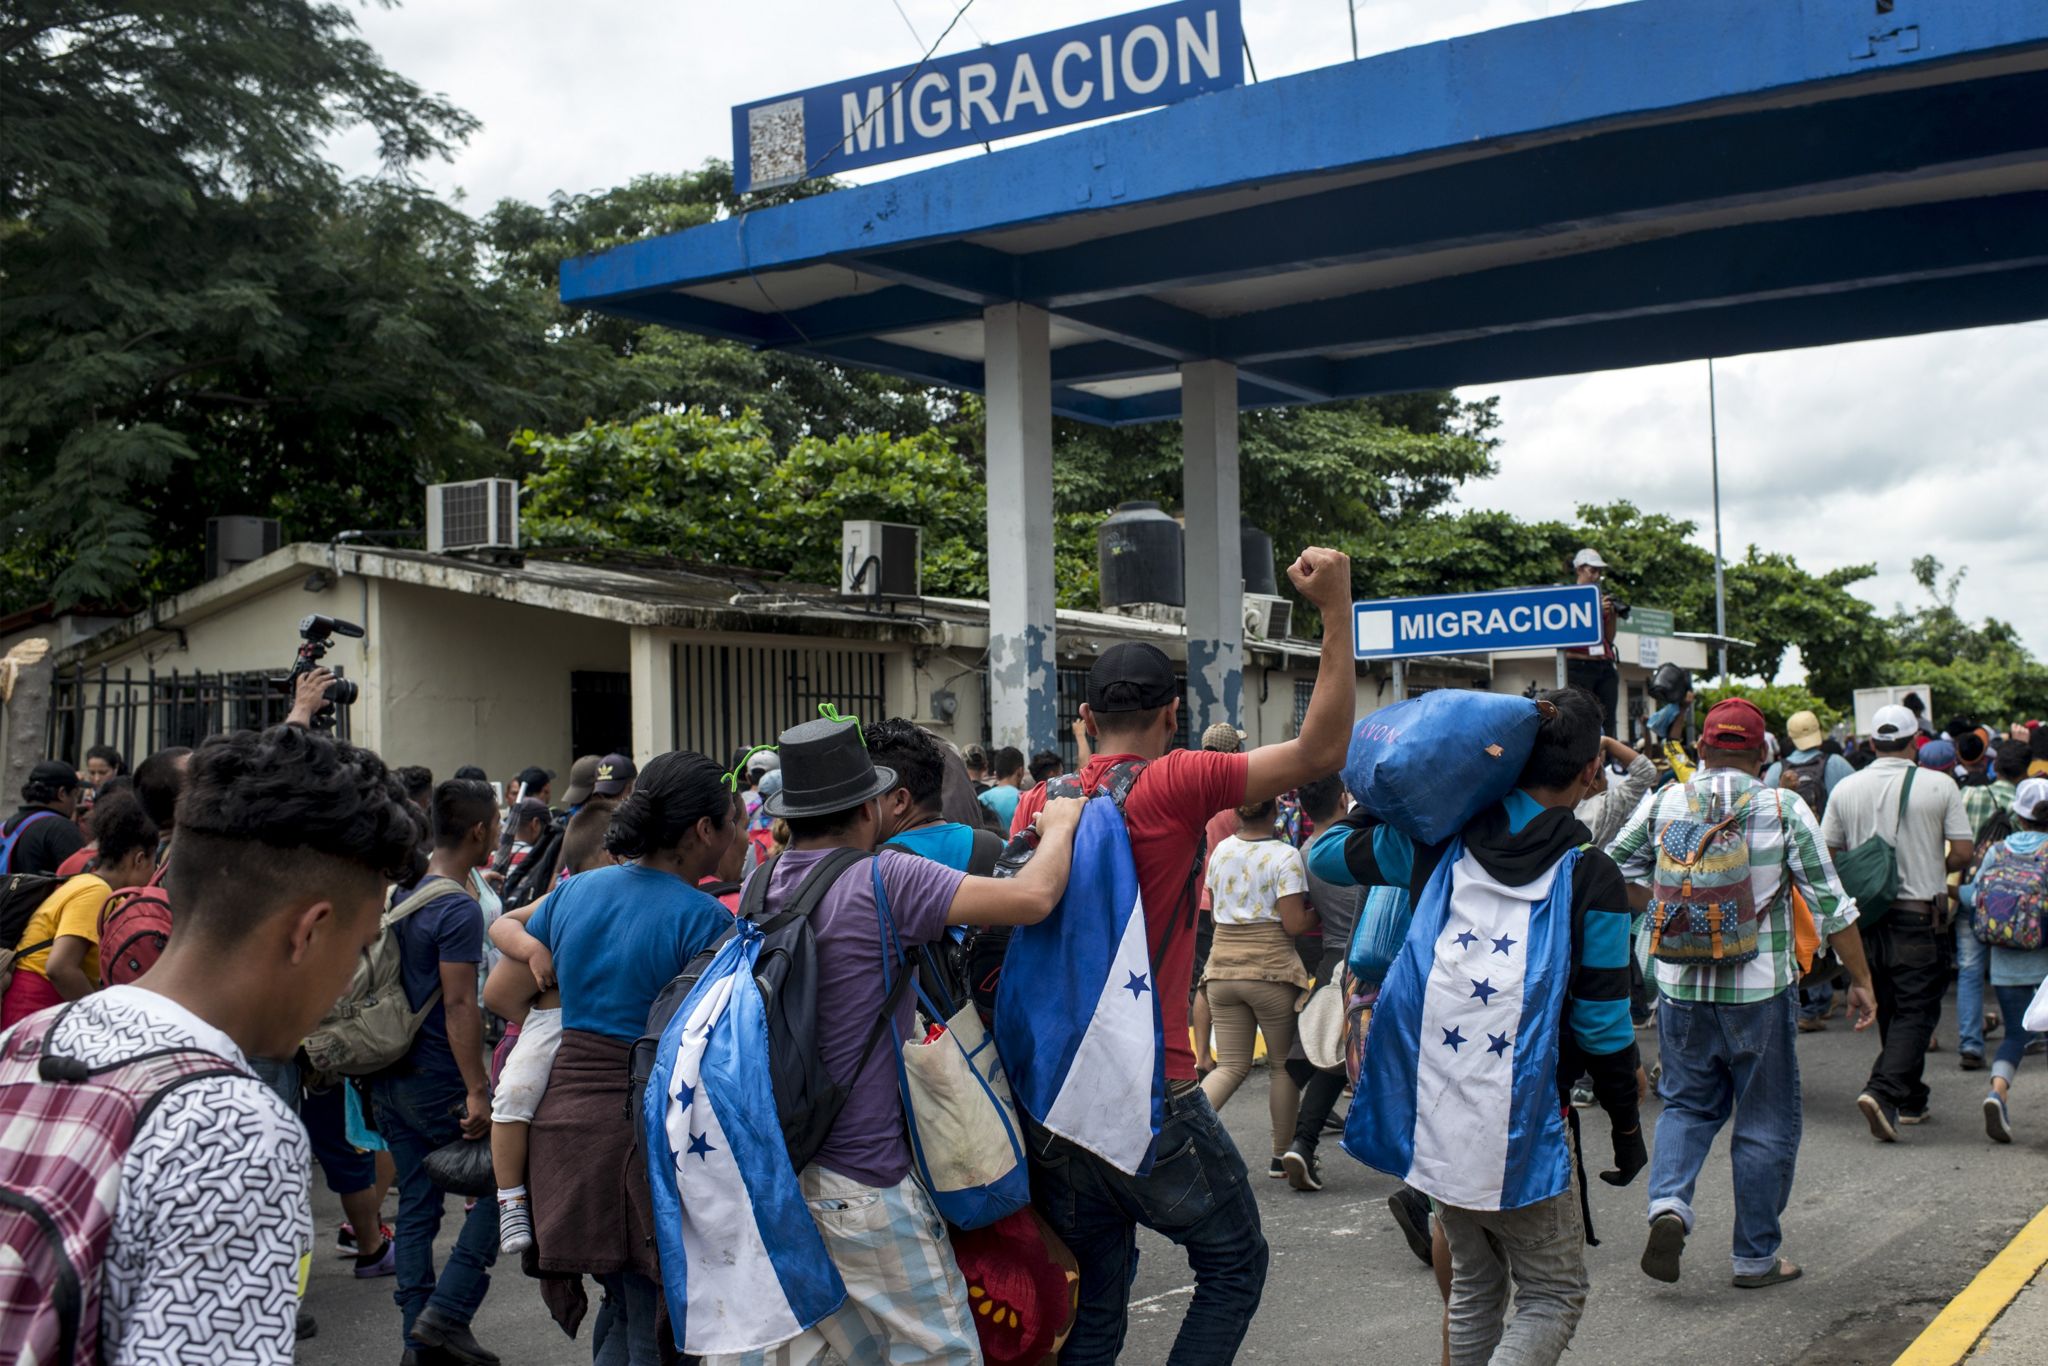 Thousands of Honduran migrants cross the border bridge between Guatemala and Mexico, while hundreds of federal police and soldiers wait on the other side.